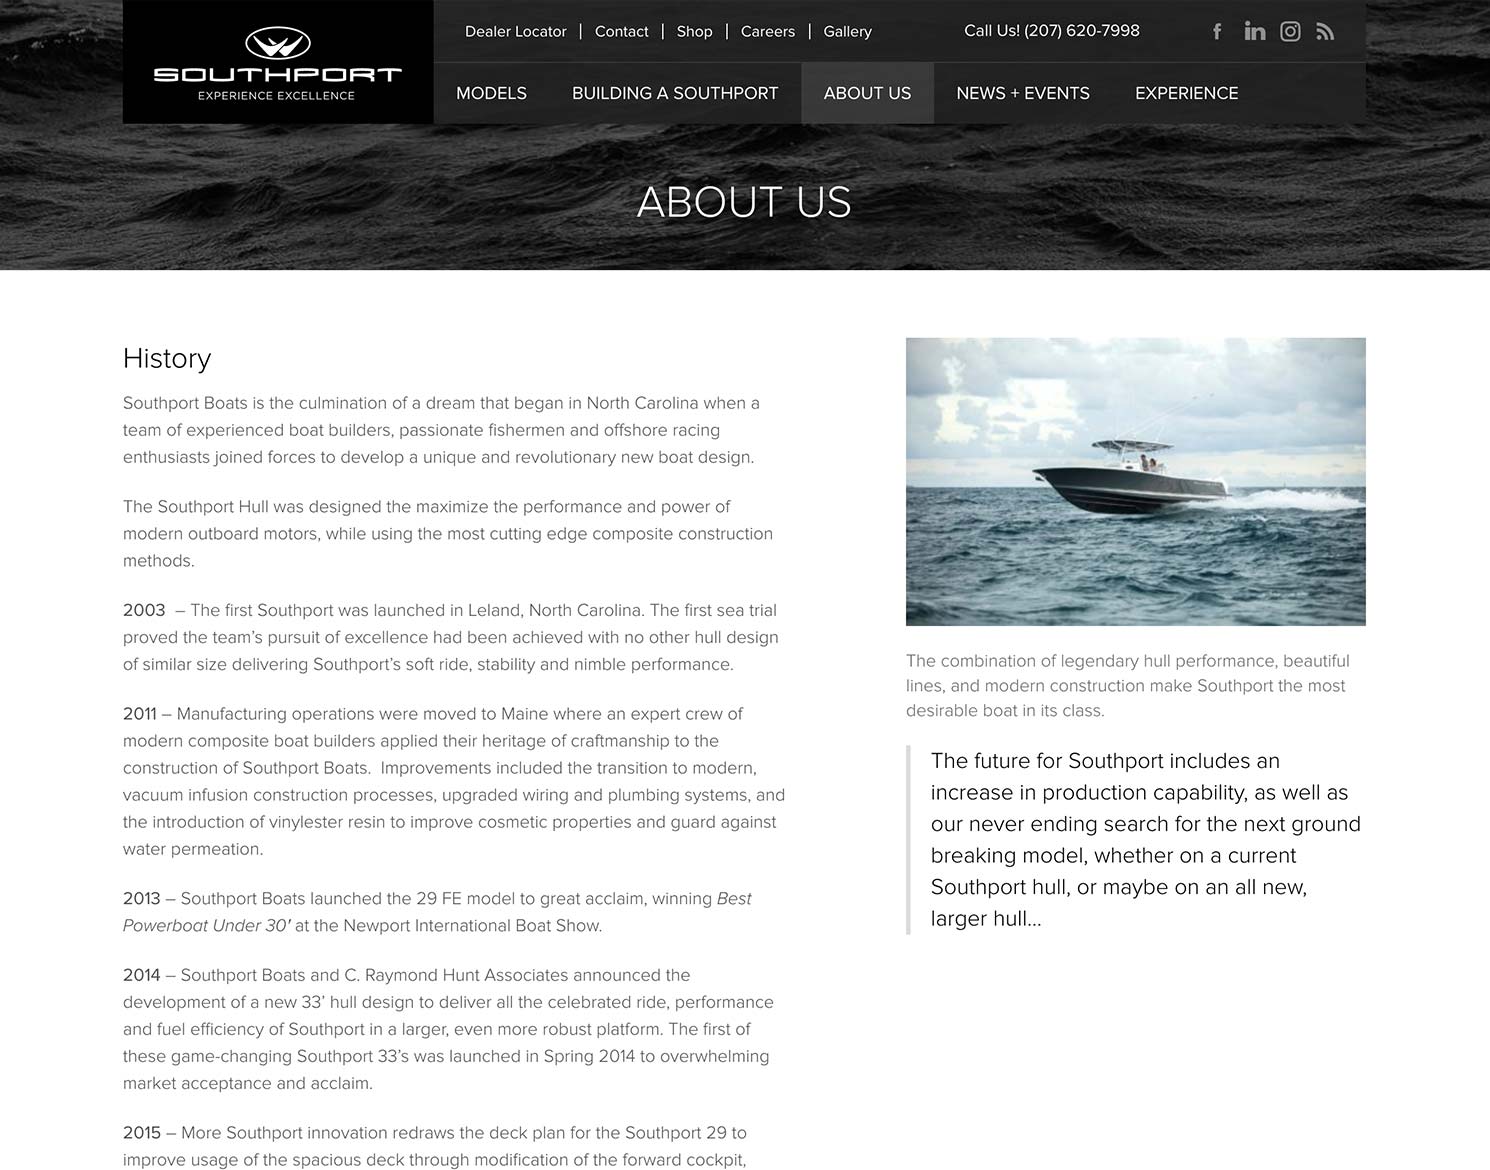 Southport Boats website design showing about us page